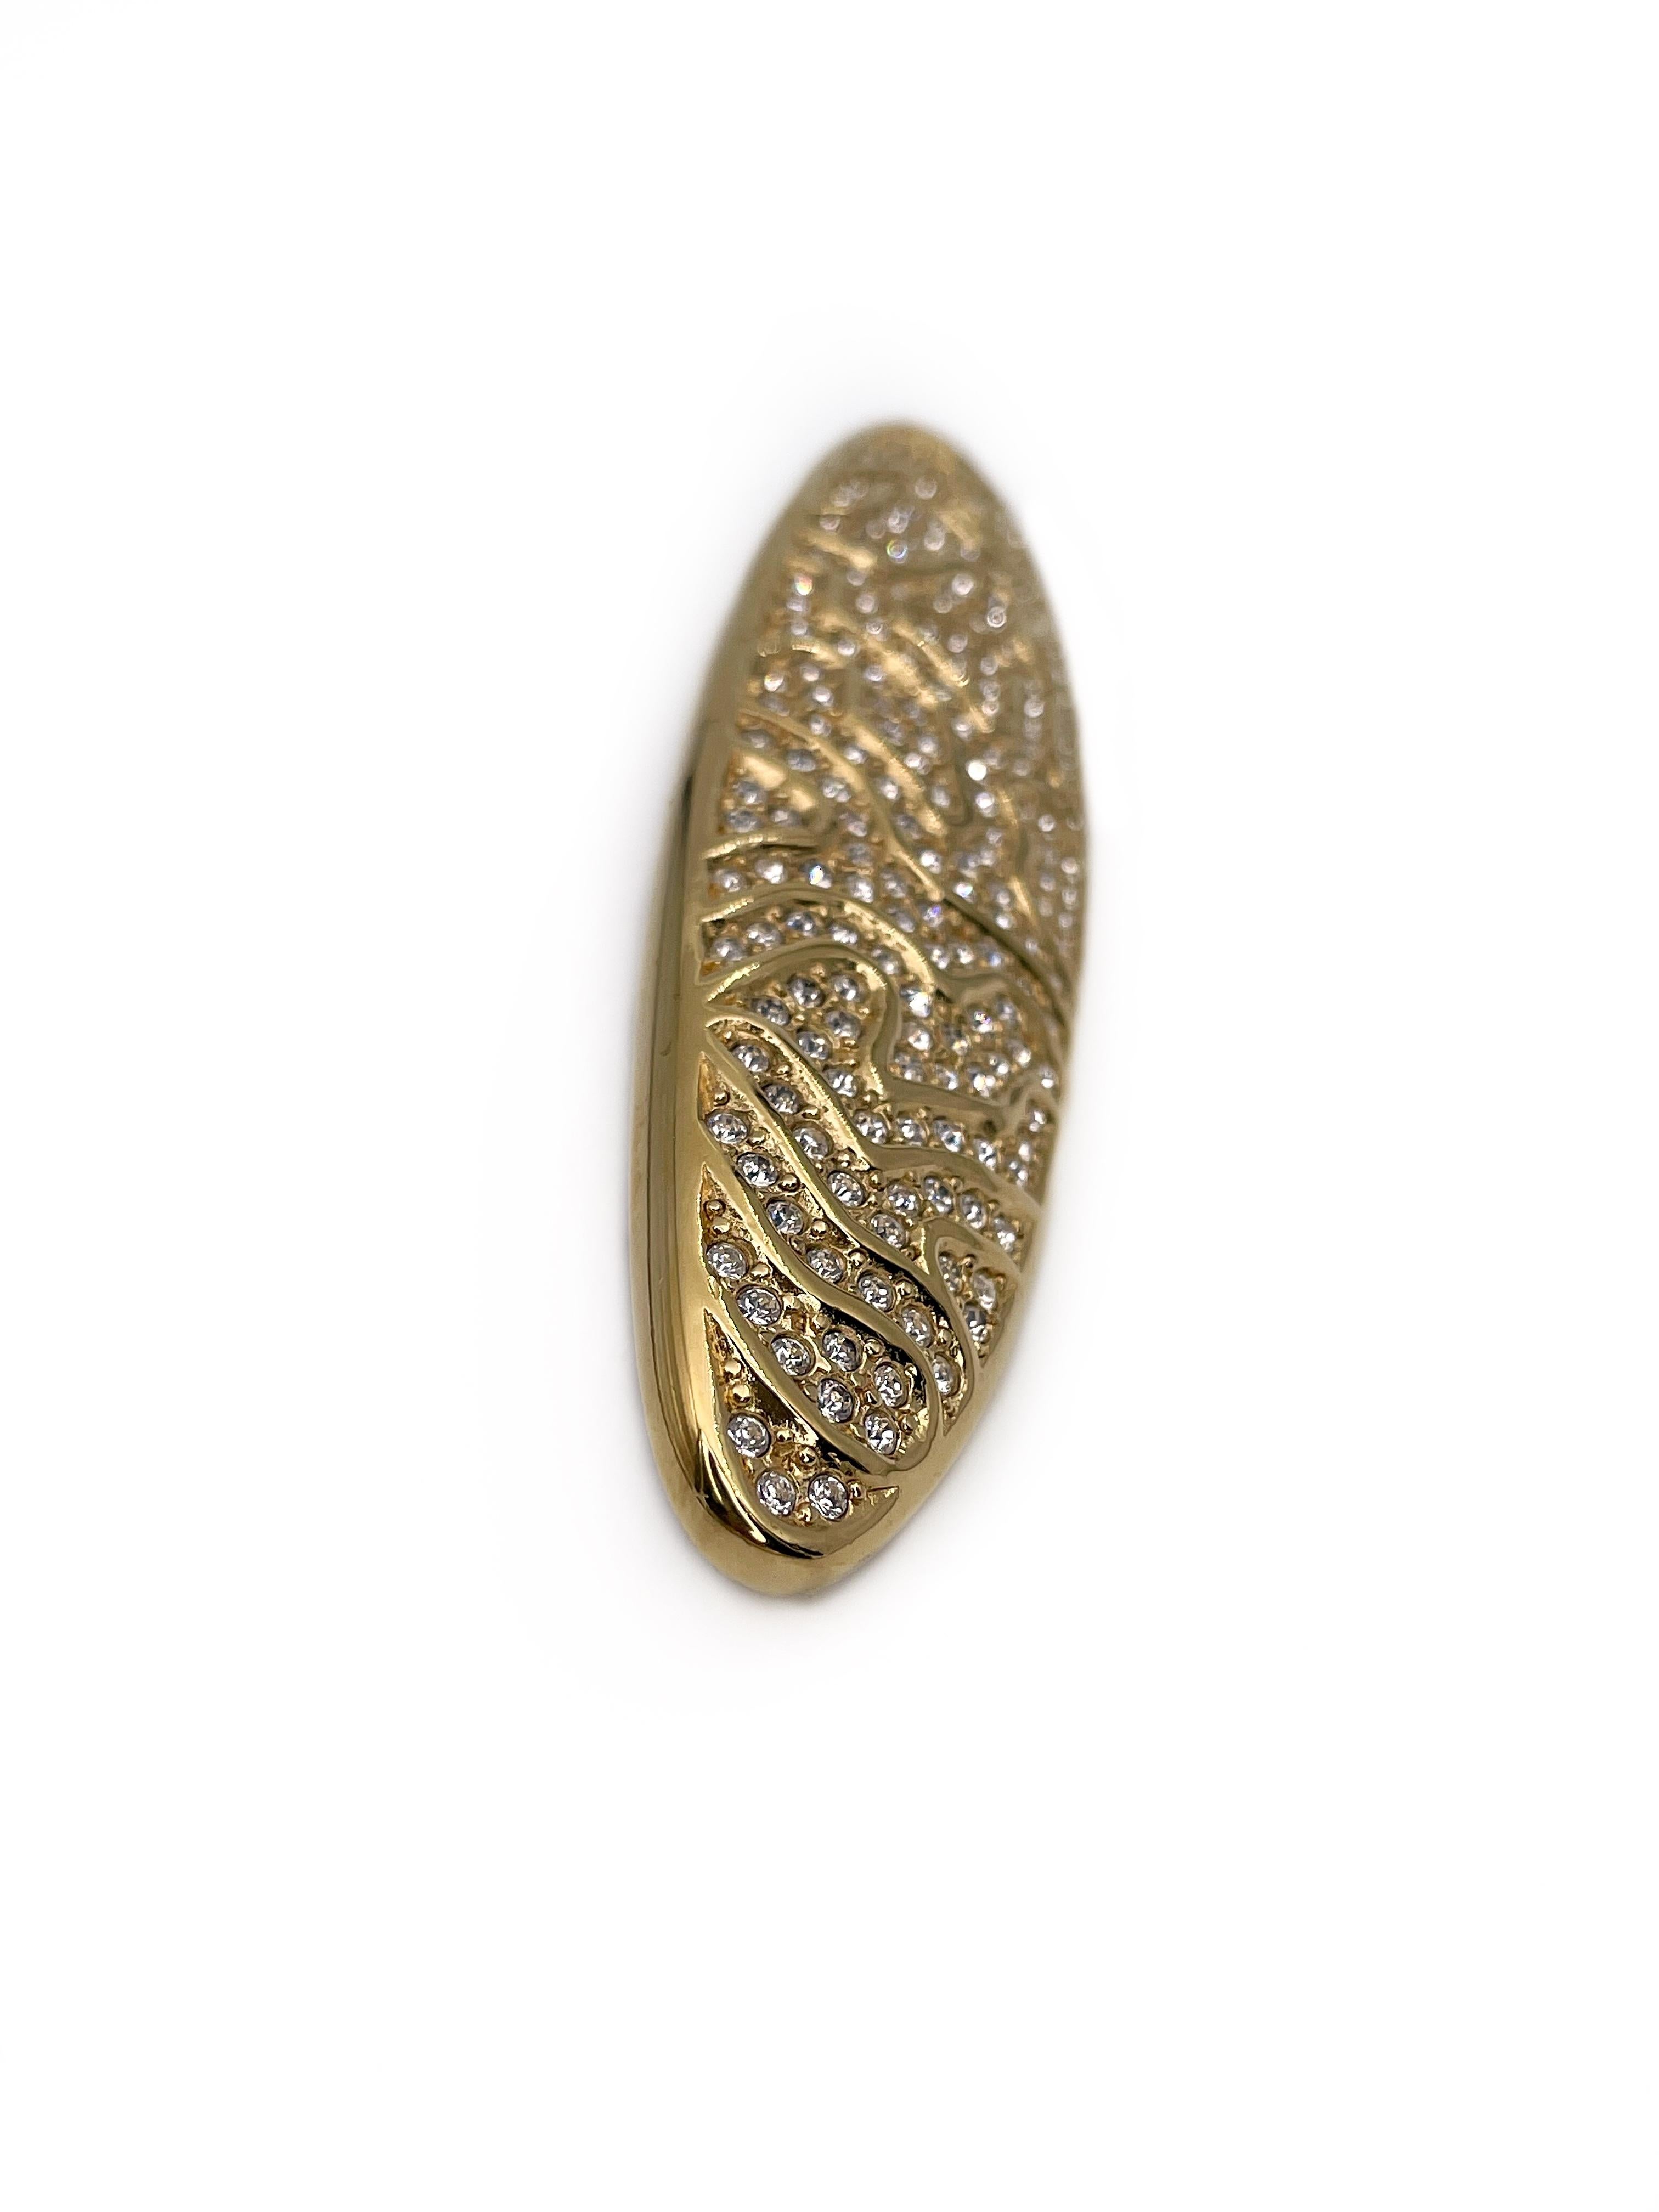 This is a yellow gold tone horizontal oval brooch designed by Christian Dior in 1990’s. This piece is gold plated, adorned with clear rhinestones. 

It beautifully pairs wit the same design clip on earrings available in our account.

Markings: